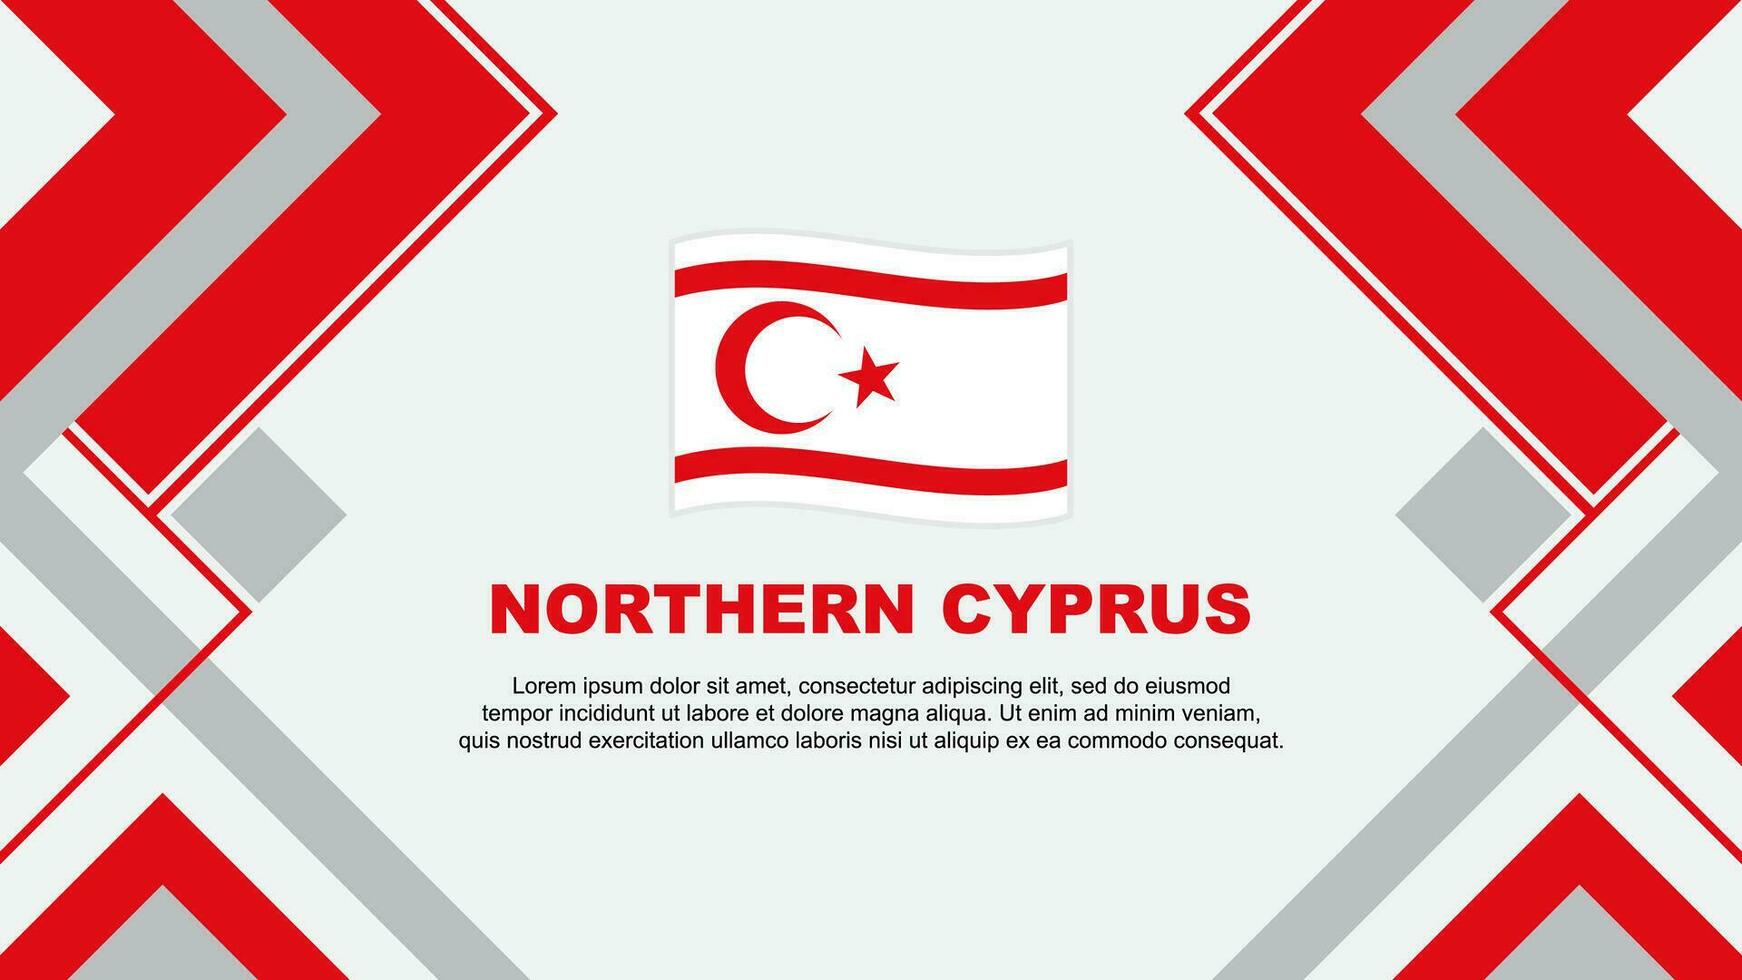 Northern Cyprus Flag Abstract Background Design Template. Northern Cyprus Independence Day Banner Wallpaper Vector Illustration. Northern Cyprus Banner